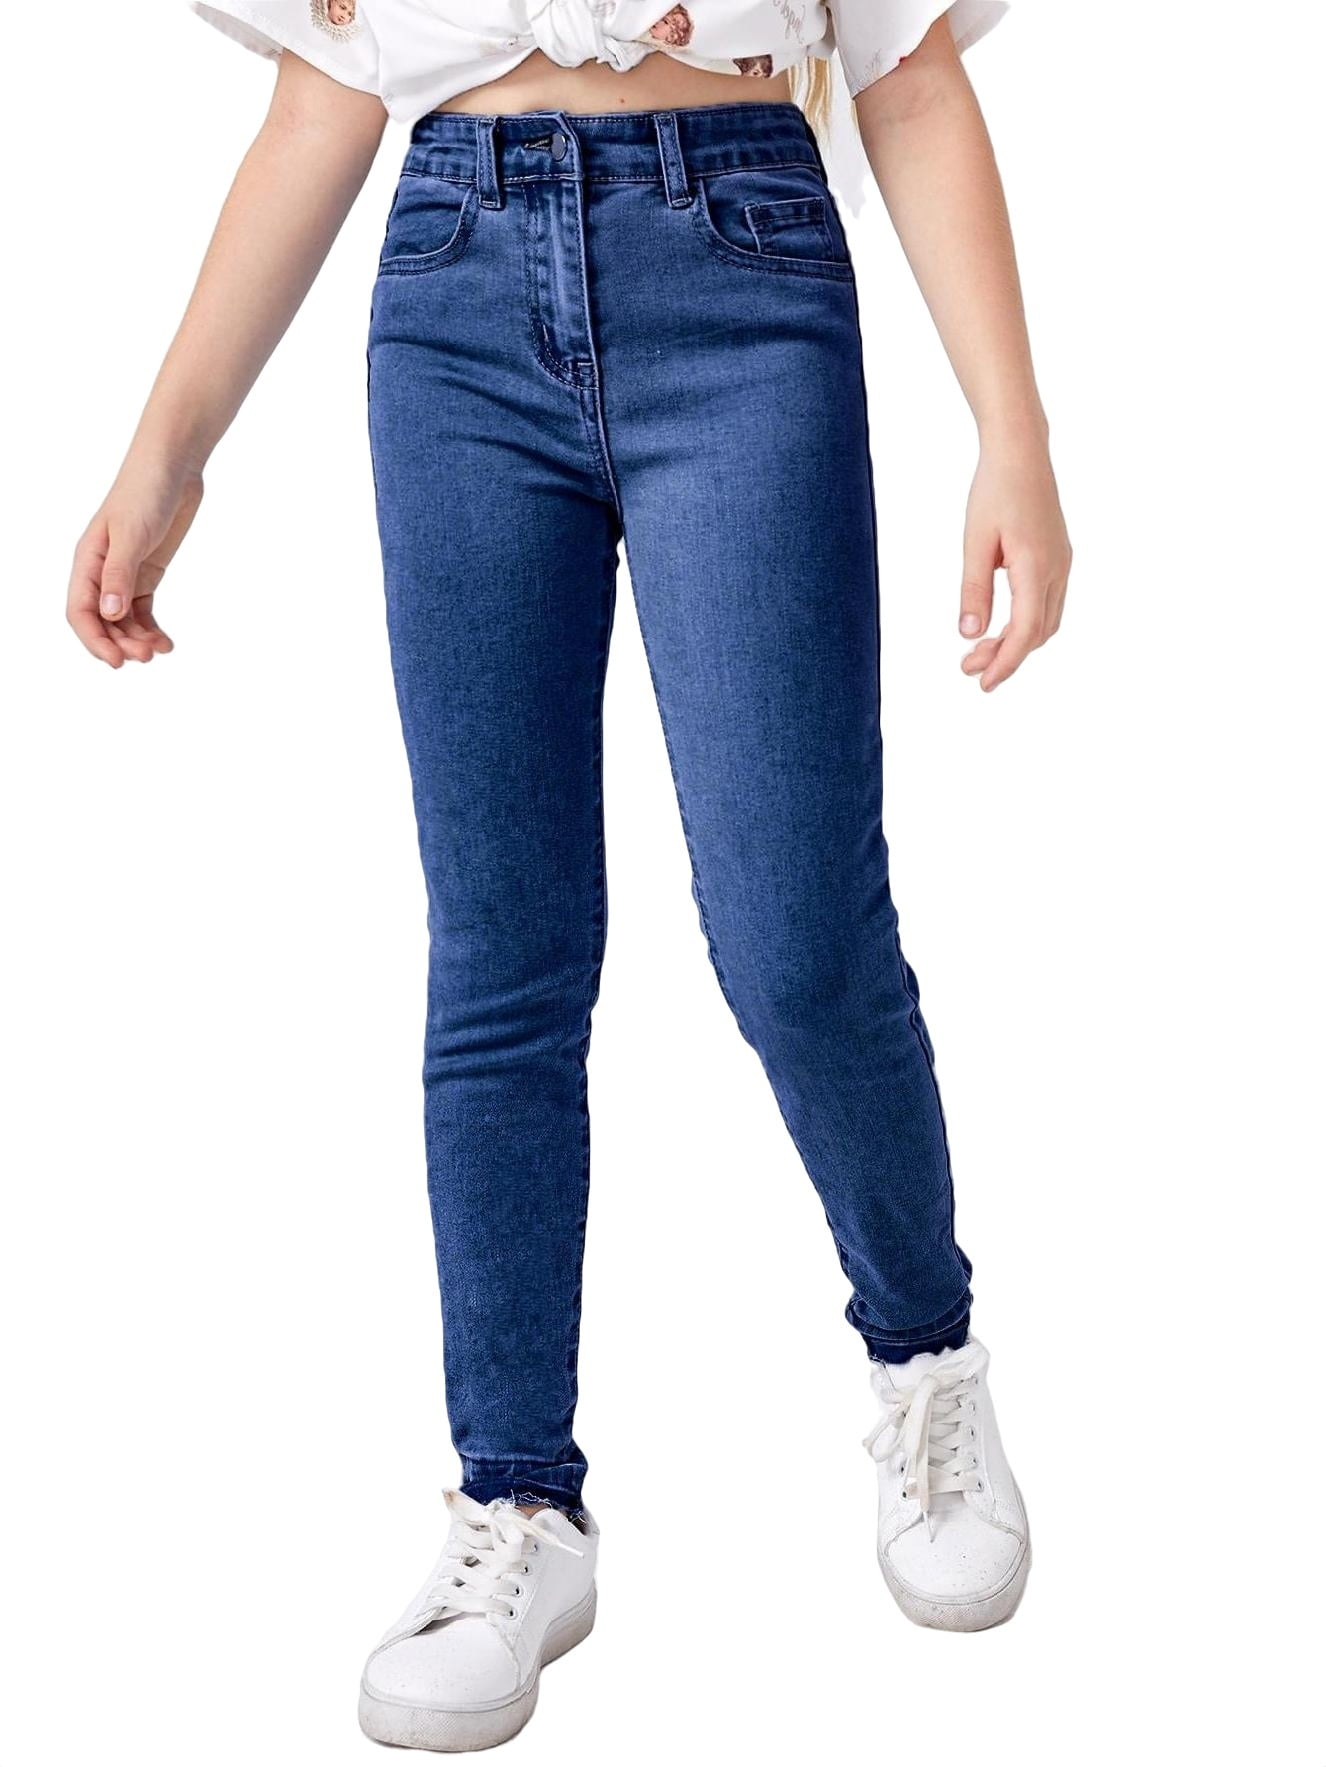 Frontwalk Women Casual Stretch Bell Bottoms Slim Fit Fashion Denim Pants  Bootcut Holiday Flare Jean